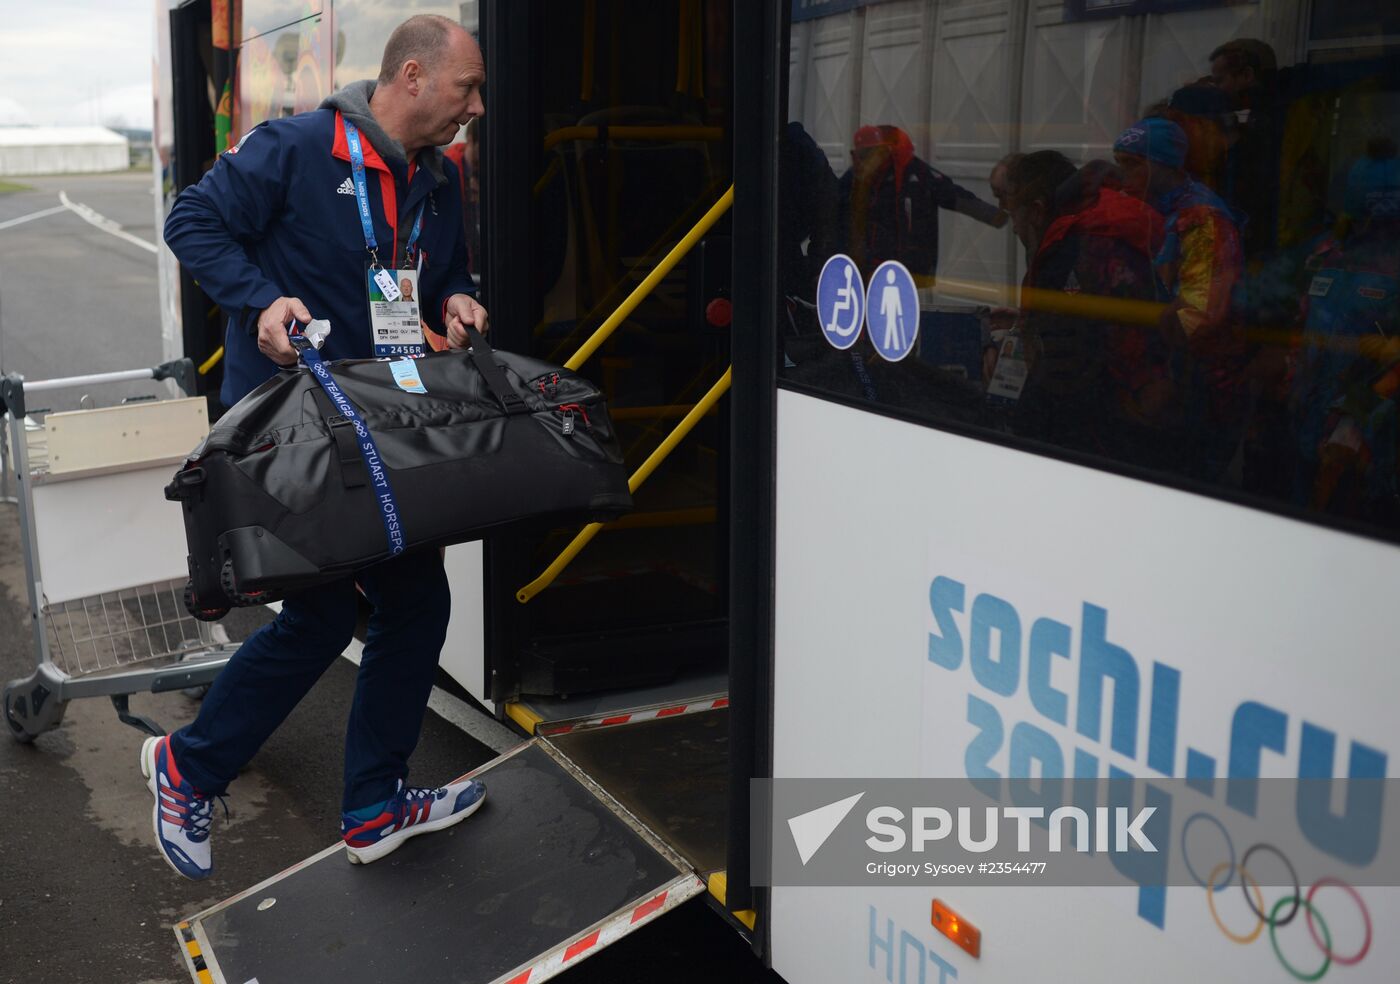 Athletes arrive in Olympic Village to participate in 2014 Games